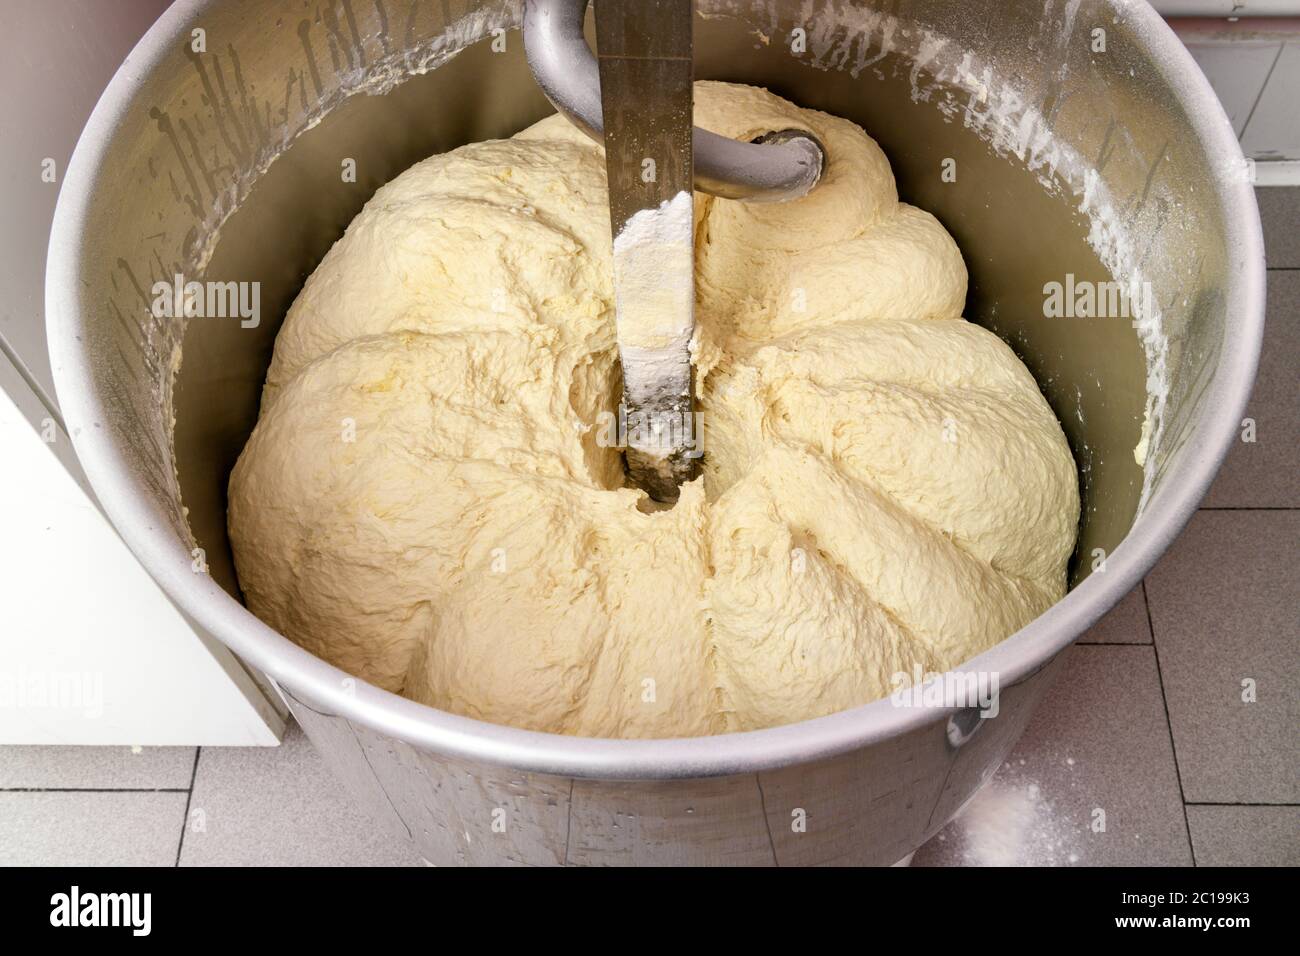 Stainless steel commercial mixing machine with a batch of pizza dough in a  high angle view looking inside during preparation Stock Photo - Alamy